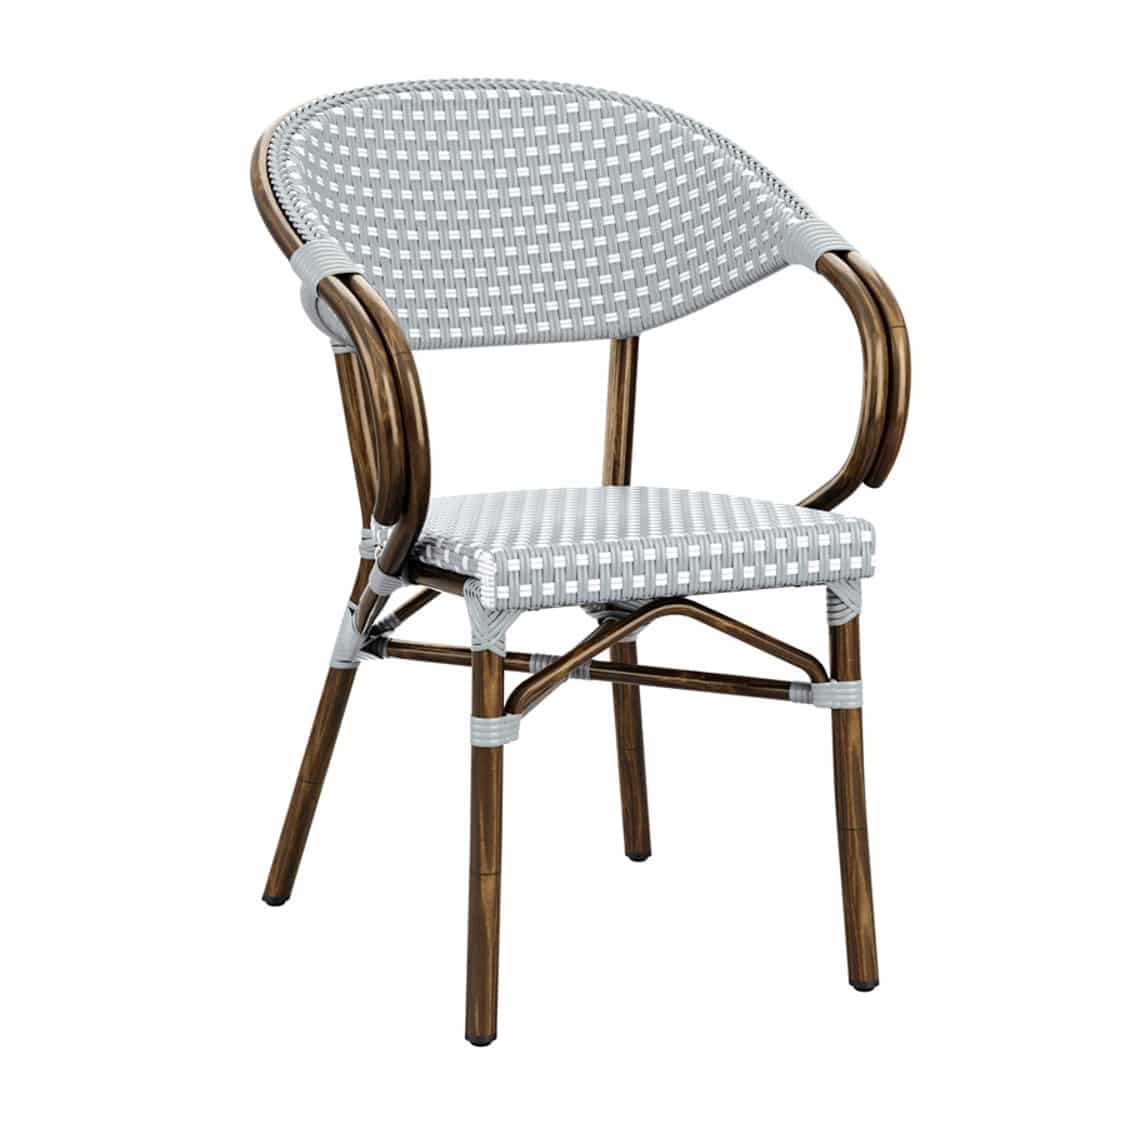 Featured image of post French Rattan Bistro Chairs Uk : The rattan bistro chair, longstanding staple of french cafés and sidewalks, is newly available all over: